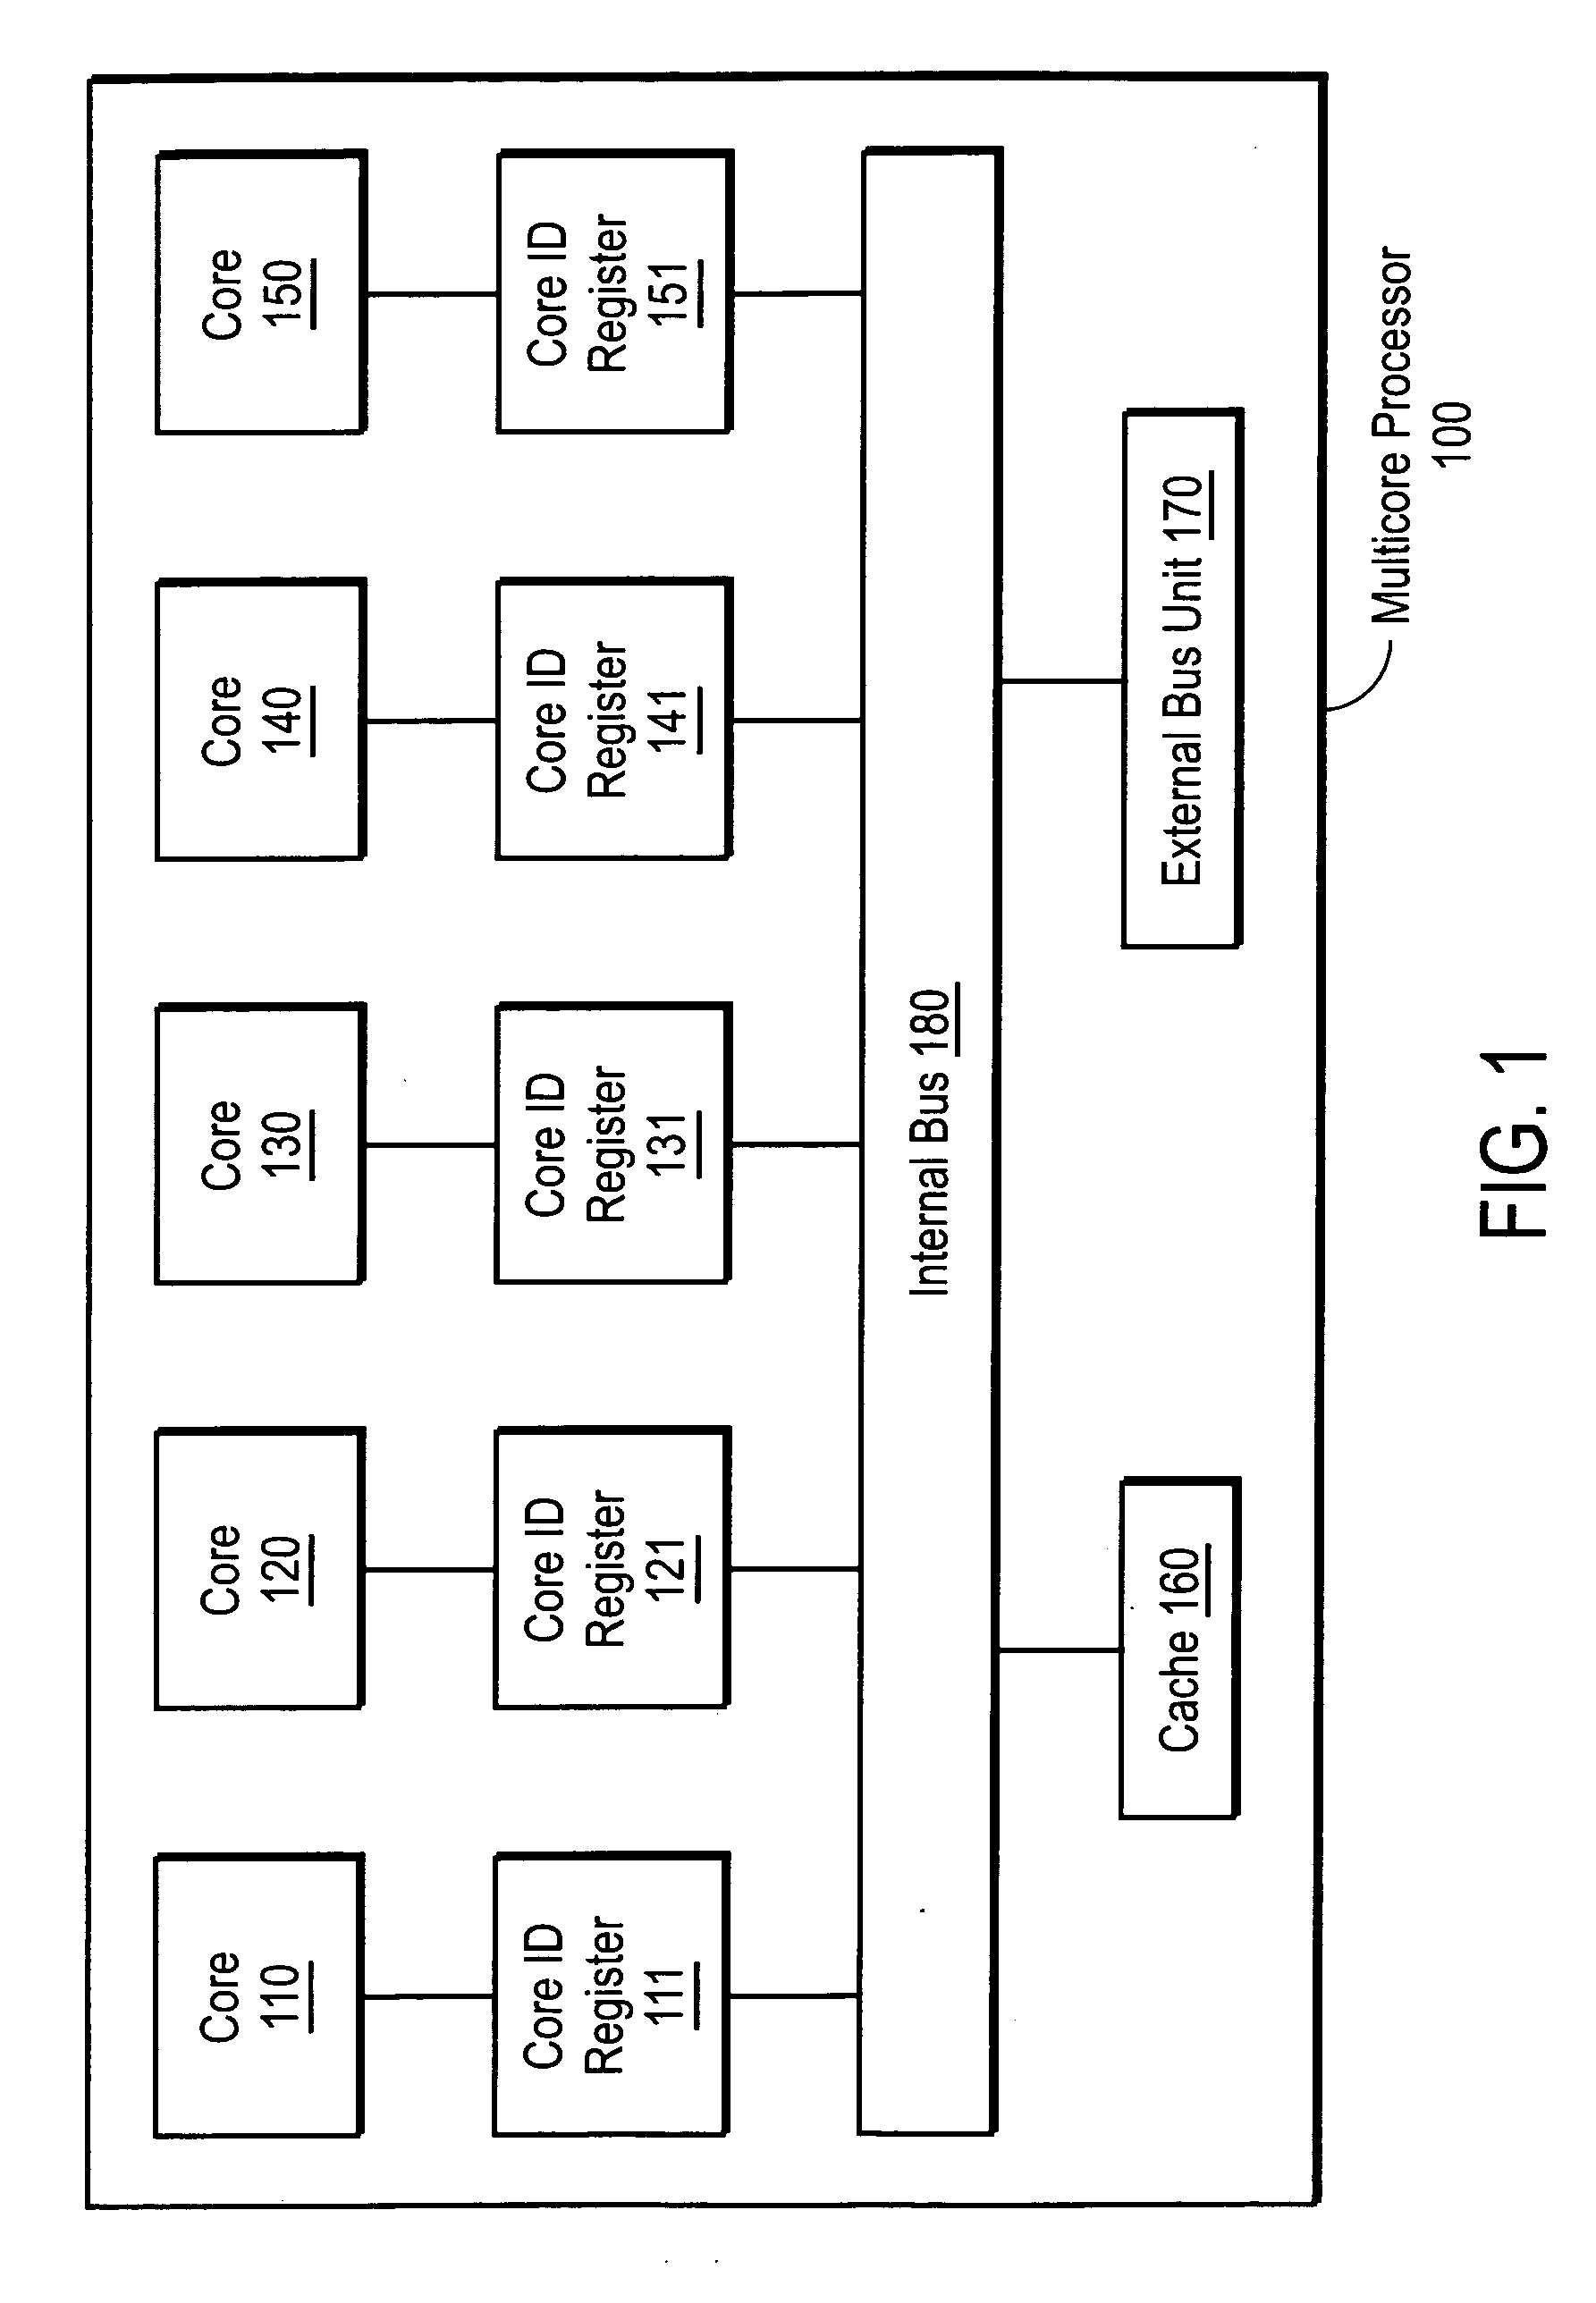 Multicore processor having active and inactive execution cores